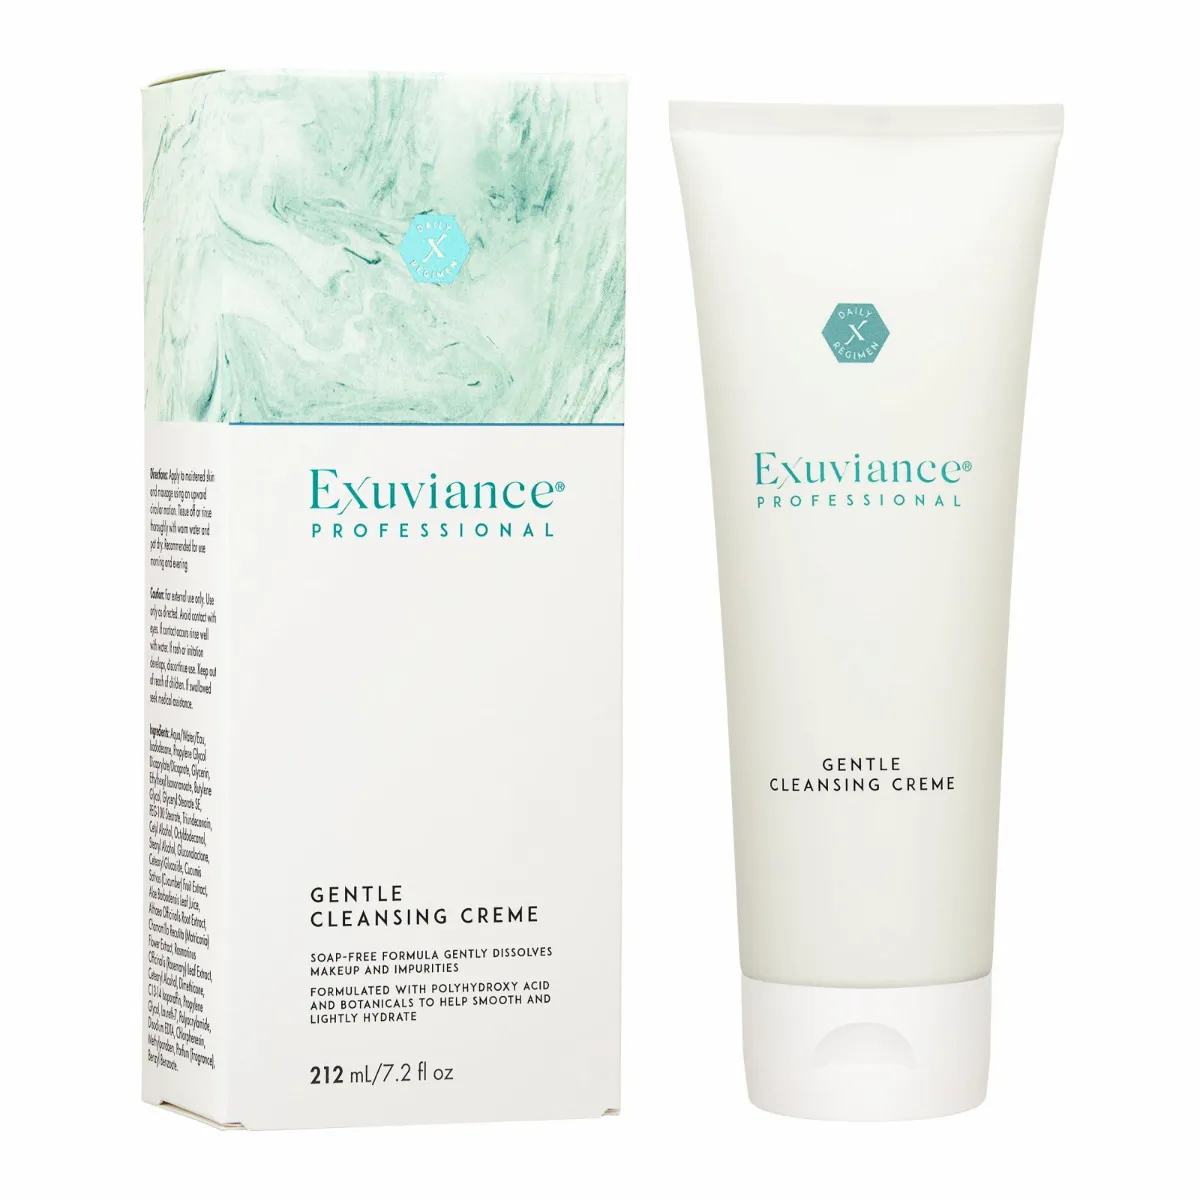 EXUVIANCE GENTLE CLEANSING CREME